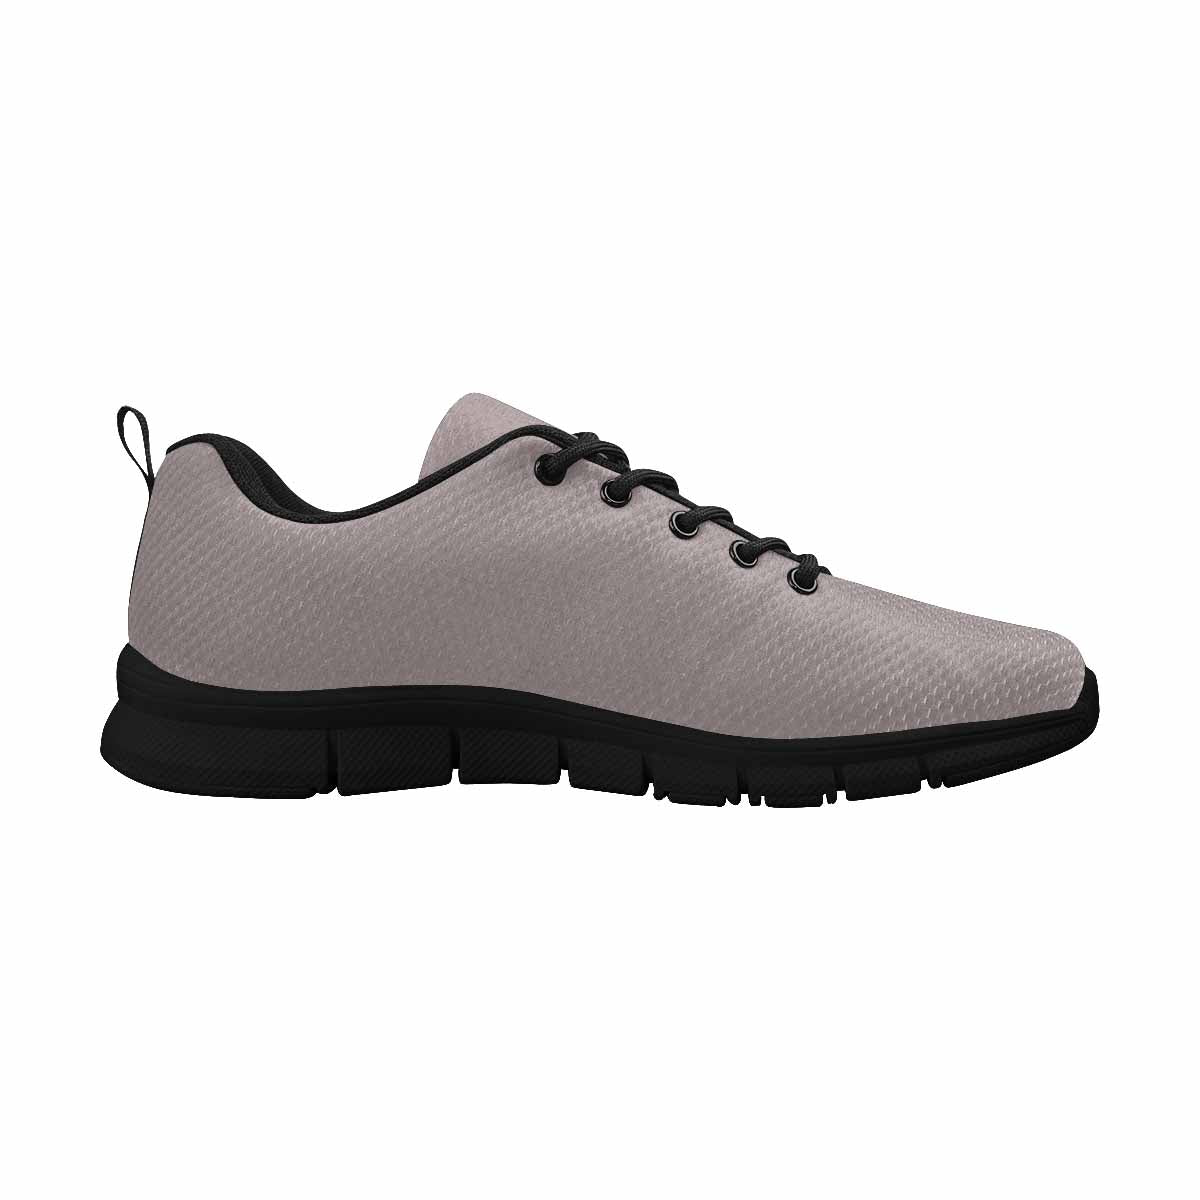 Sneakers For Men, Coffee Brown Running Shoes